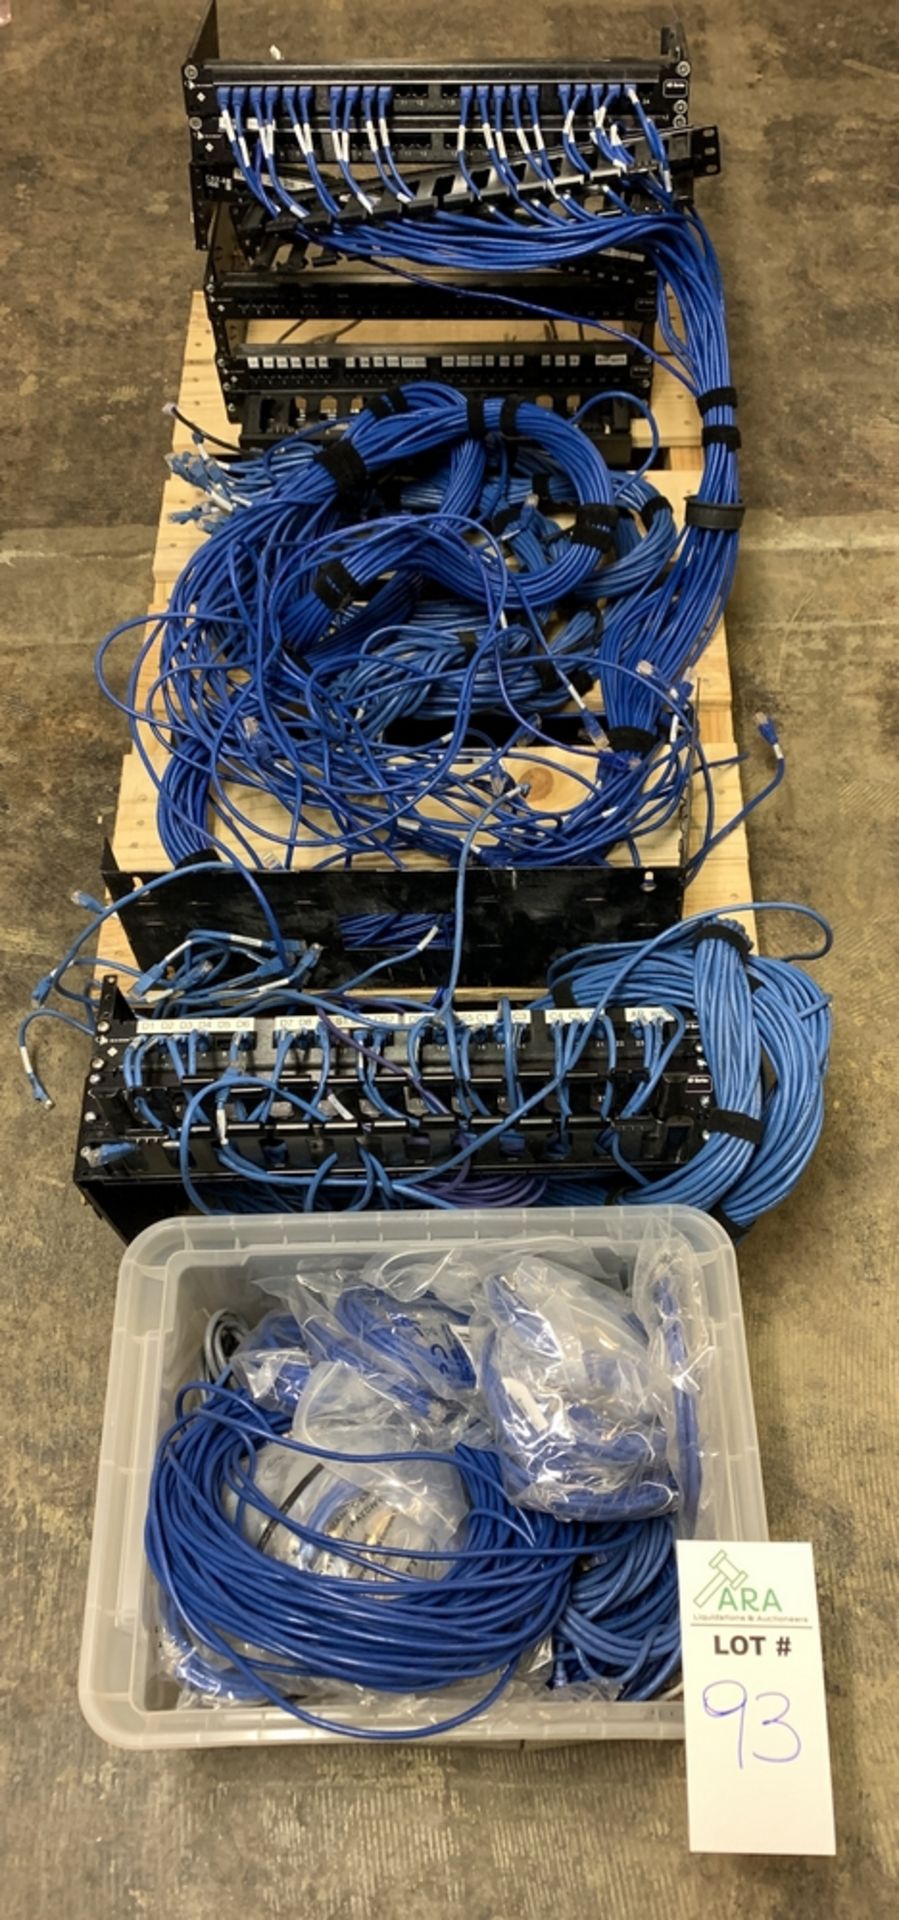 NETWORKING RACKING GEAR AND LOTS OF CABLE FOR GEAR